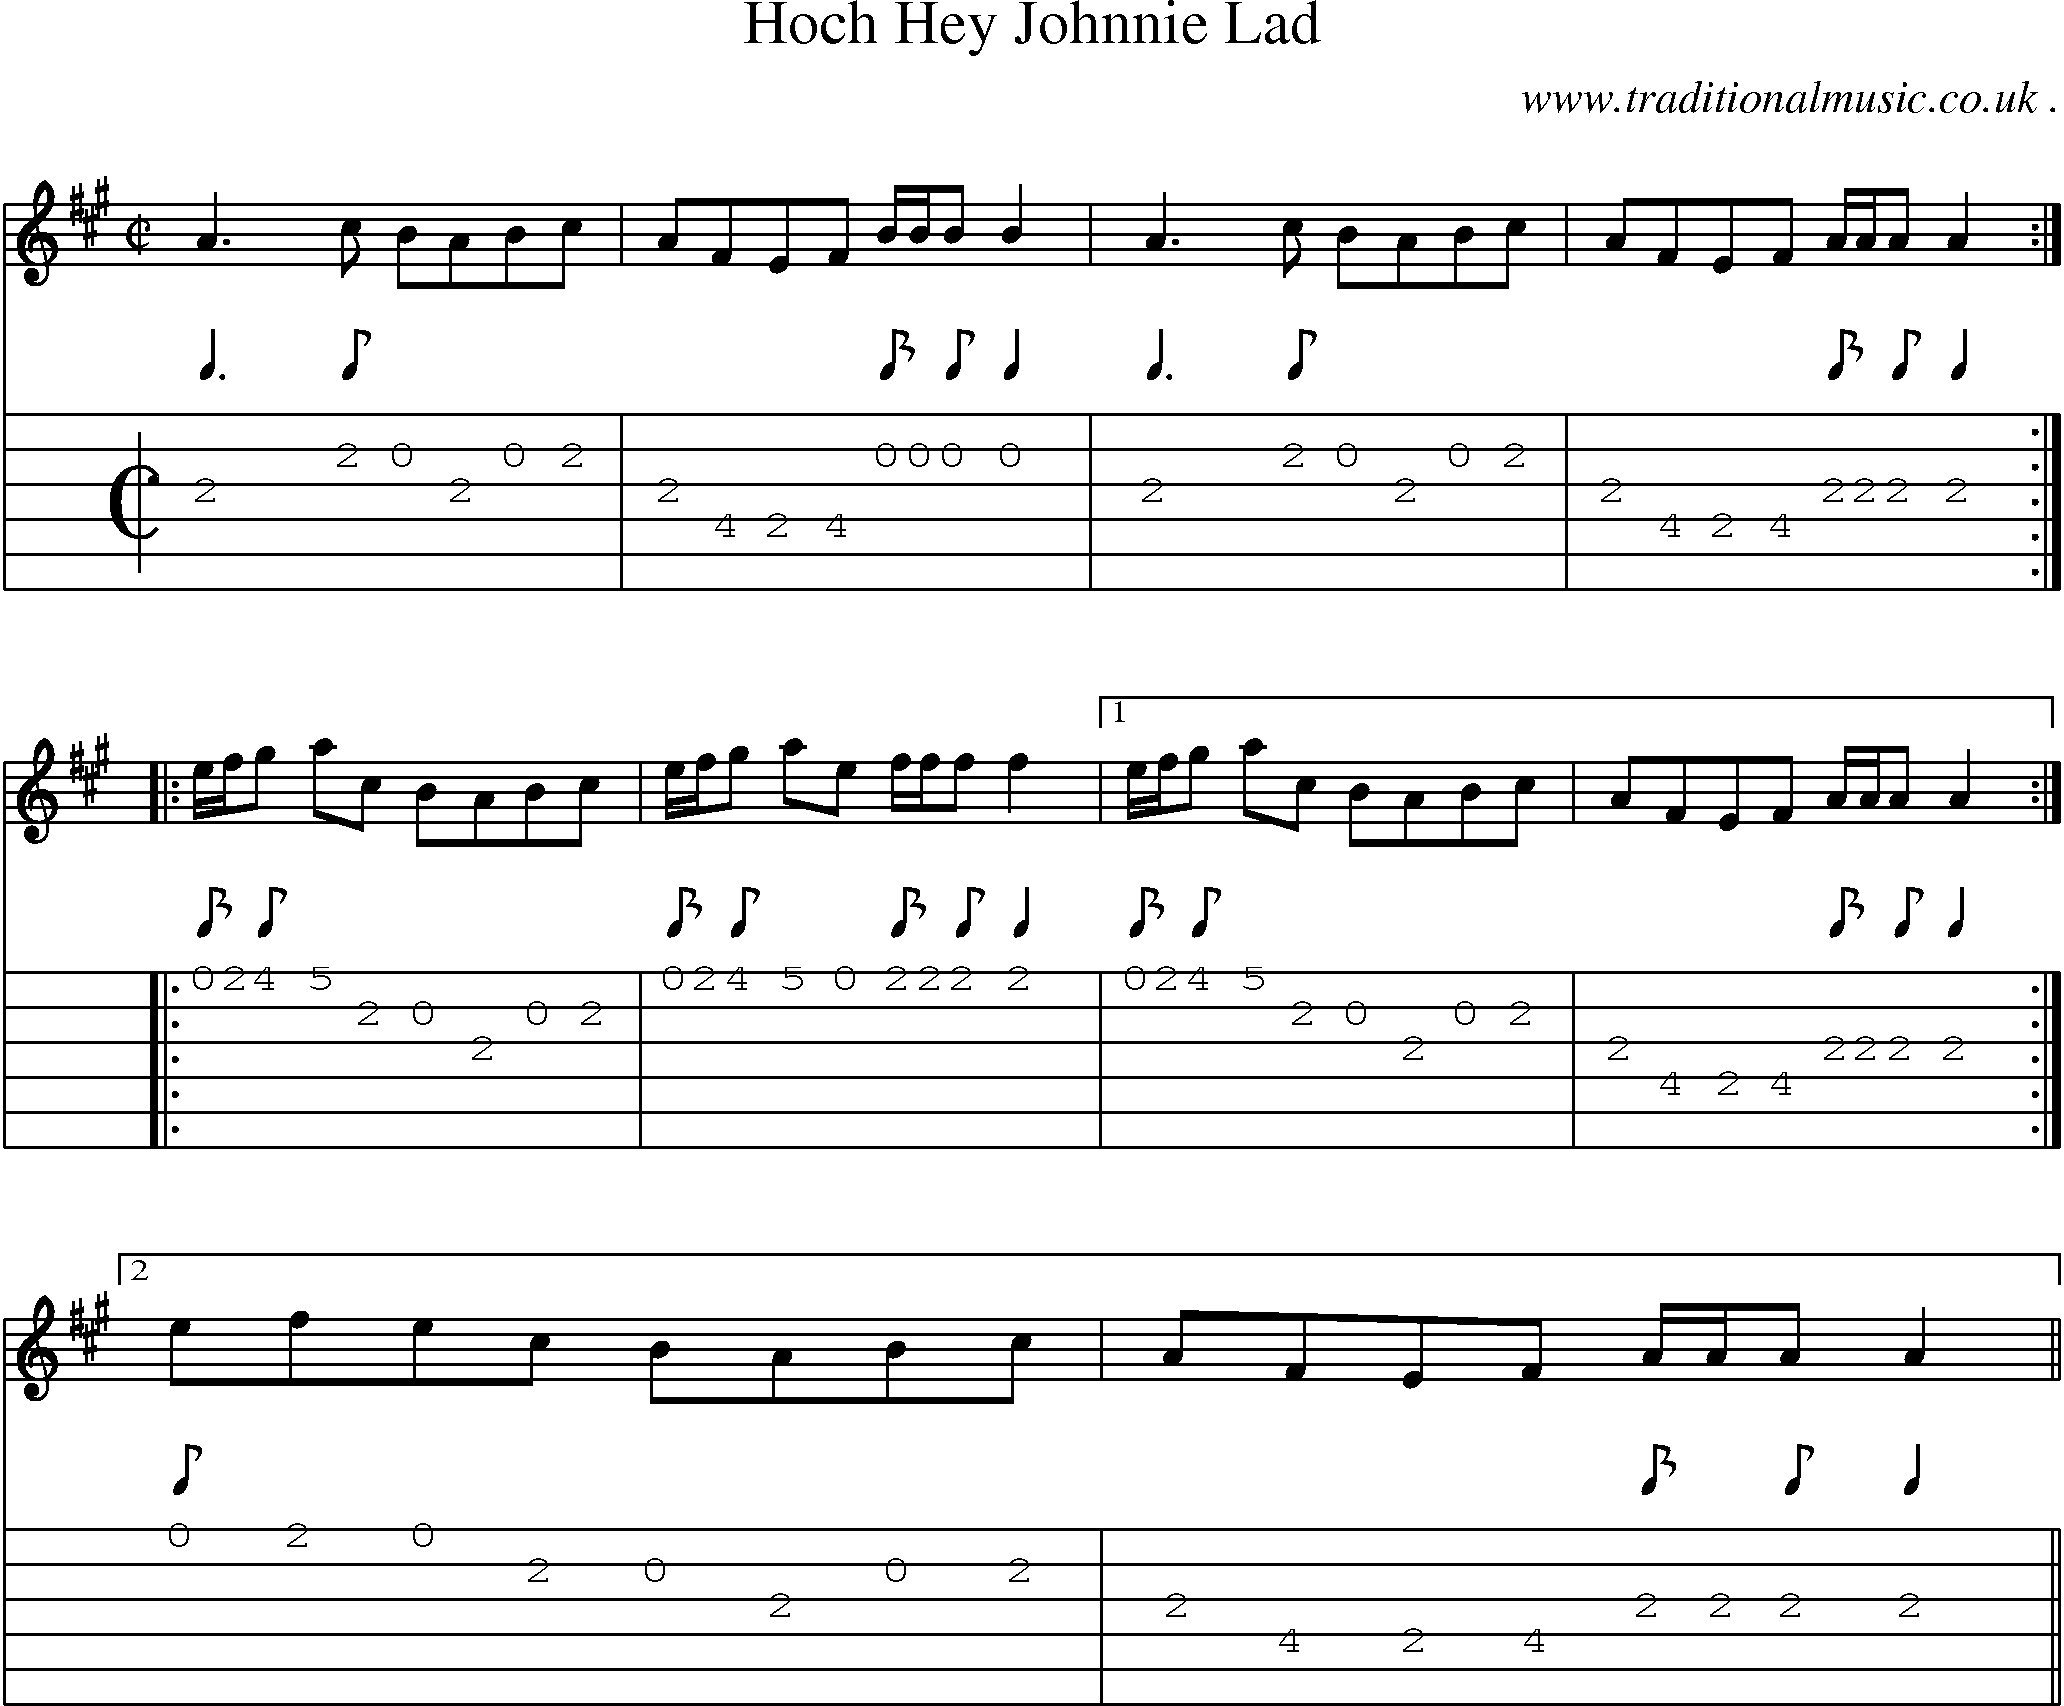 Sheet-music  score, Chords and Guitar Tabs for Hoch Hey Johnnie Lad